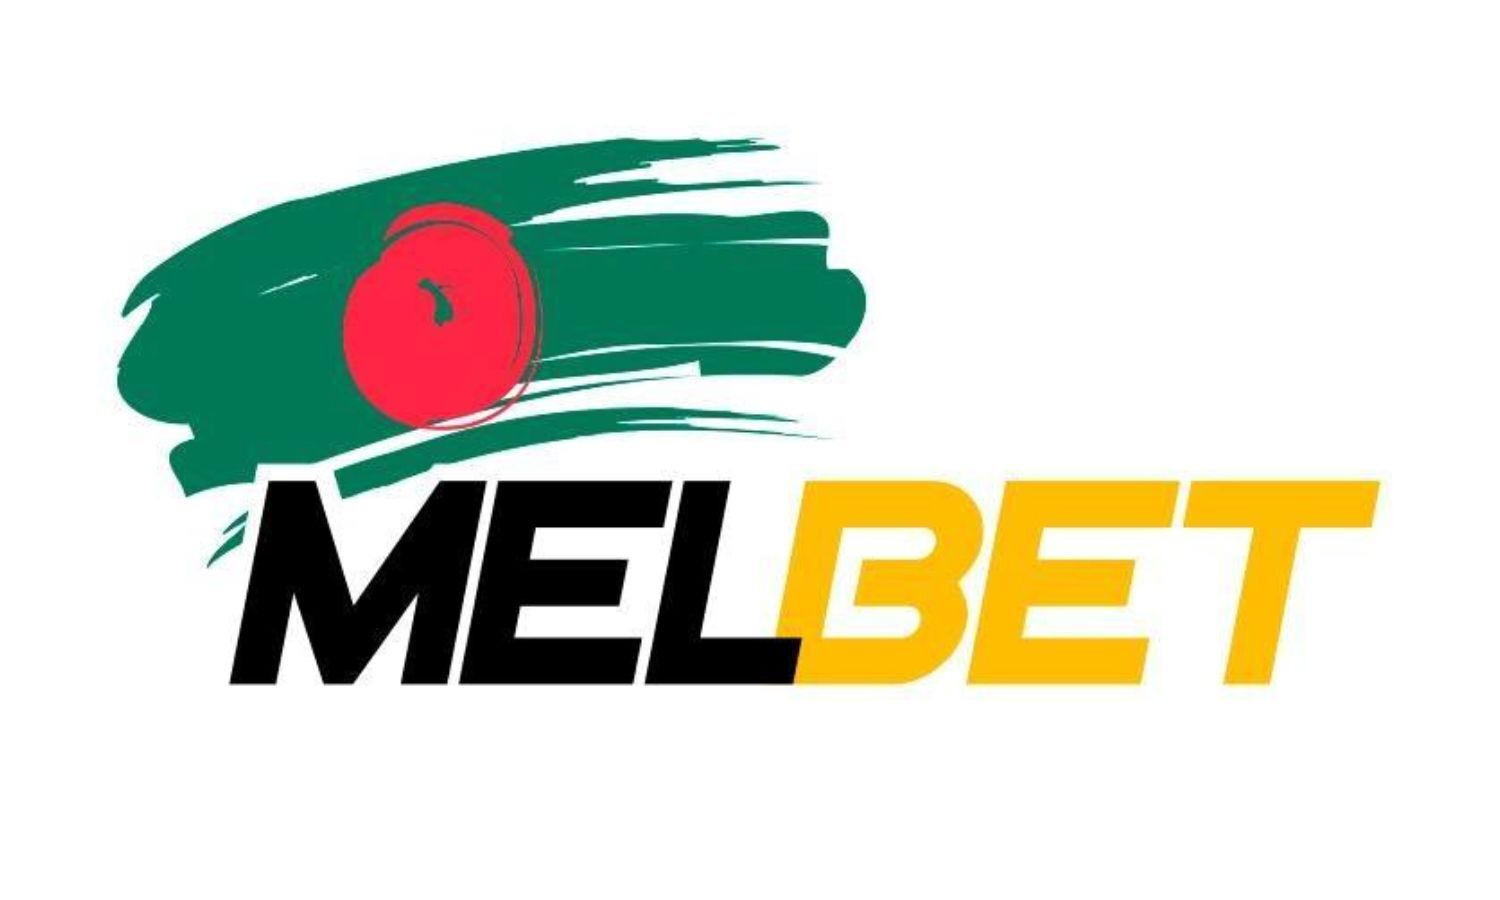 Melbet App Bangladesh: Get the App and Start Betting Now